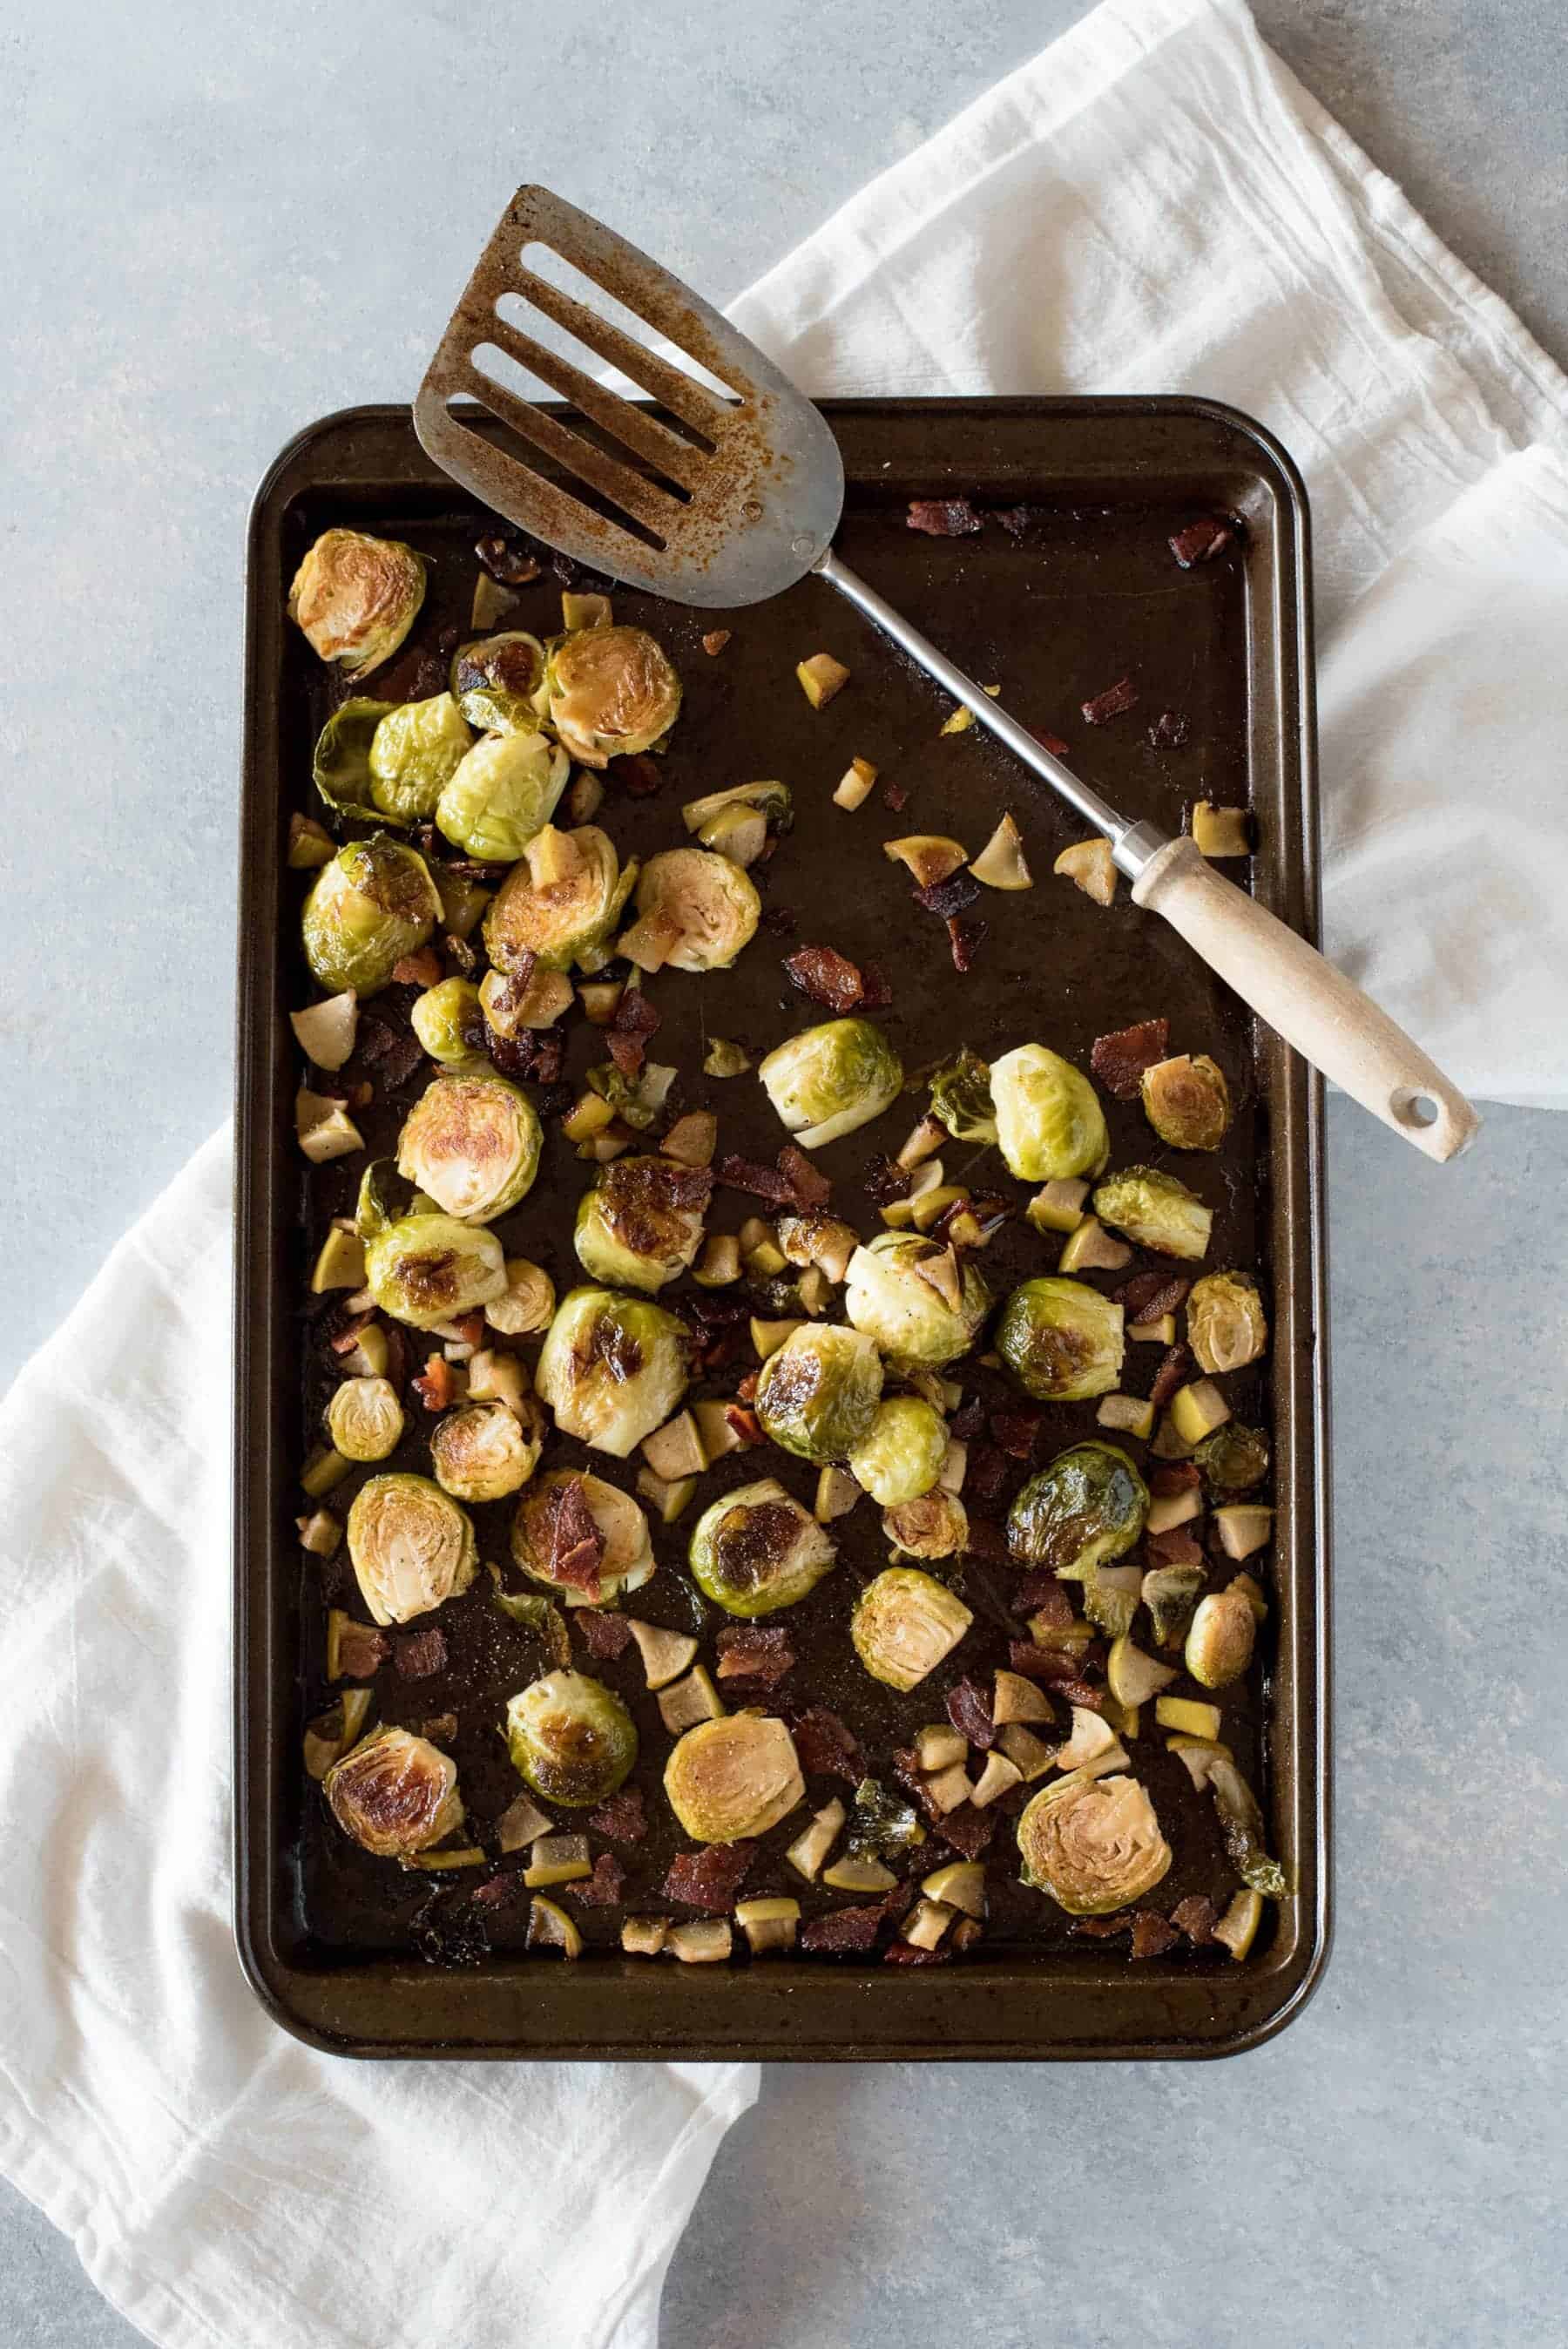 Roasted brussel sprouts with bacon and apples 15 Tasty Thanksgiving Dinner Recipes to Cook This Year